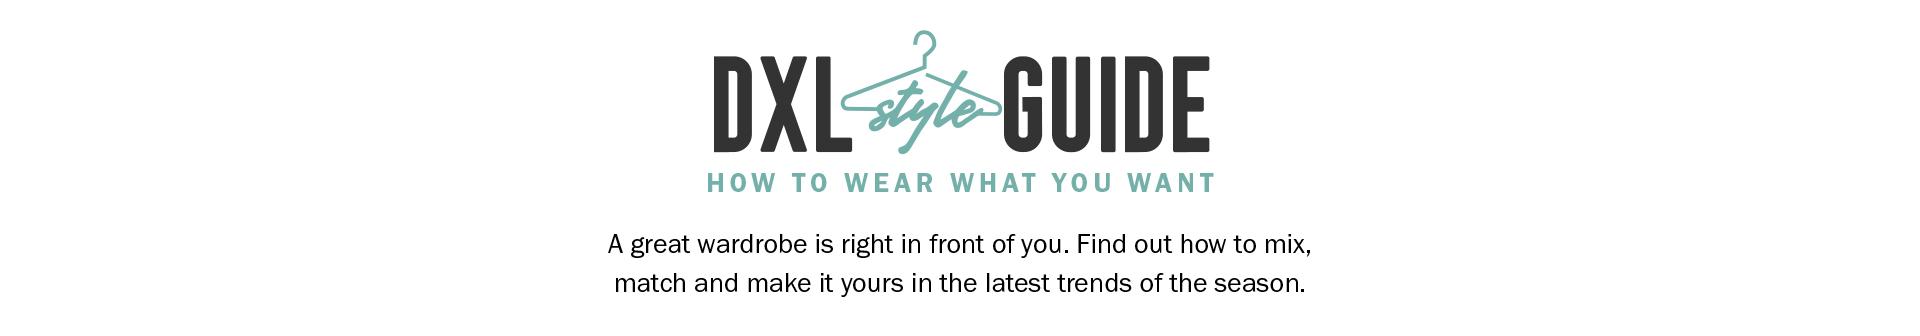 DXL STYLE GUIDE | HOW TO WEAR WHAT YOU WANT | A great wardrobe is right in front of you. Find out how to mix, match and make it yours in the latest trends of the season.